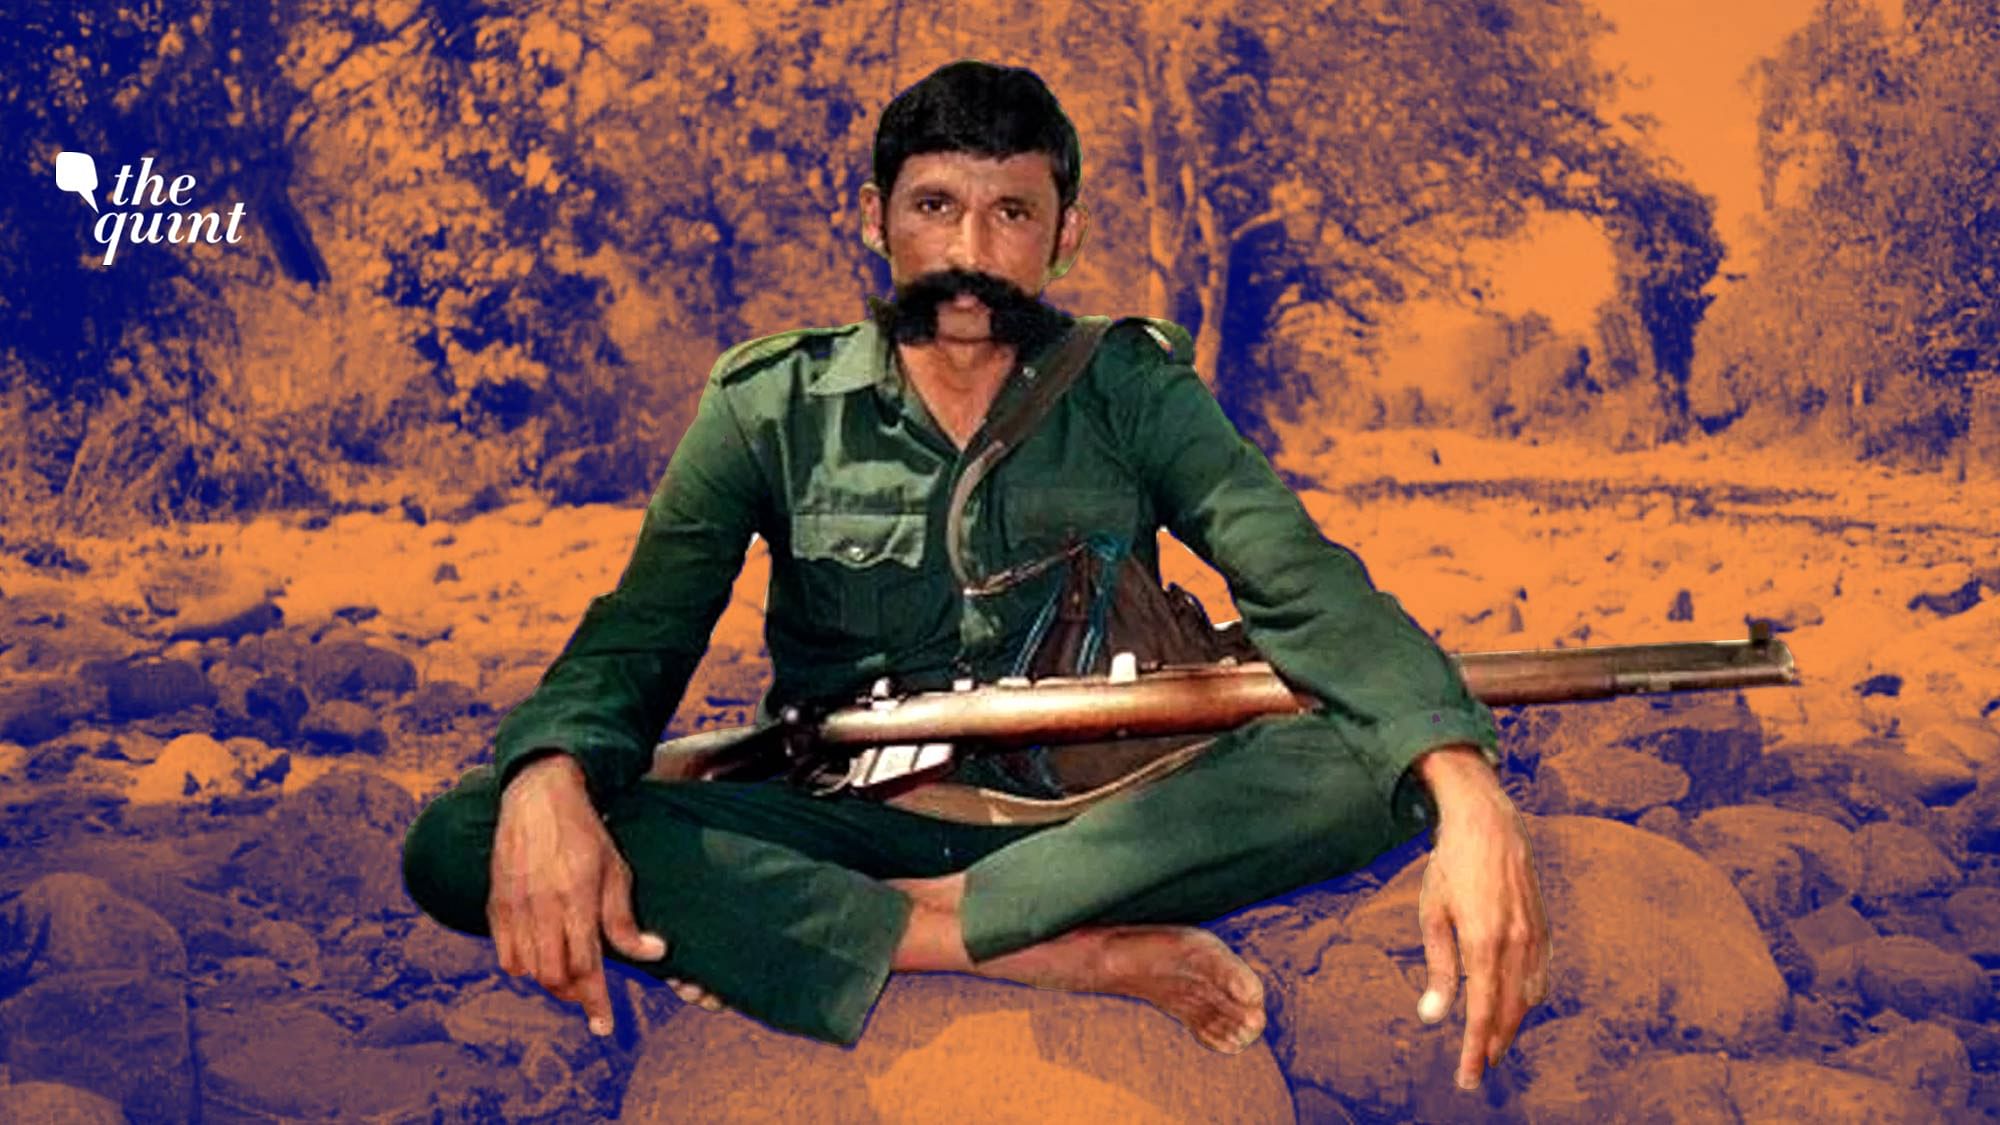 Picture of Veerappan used for representational purposes.